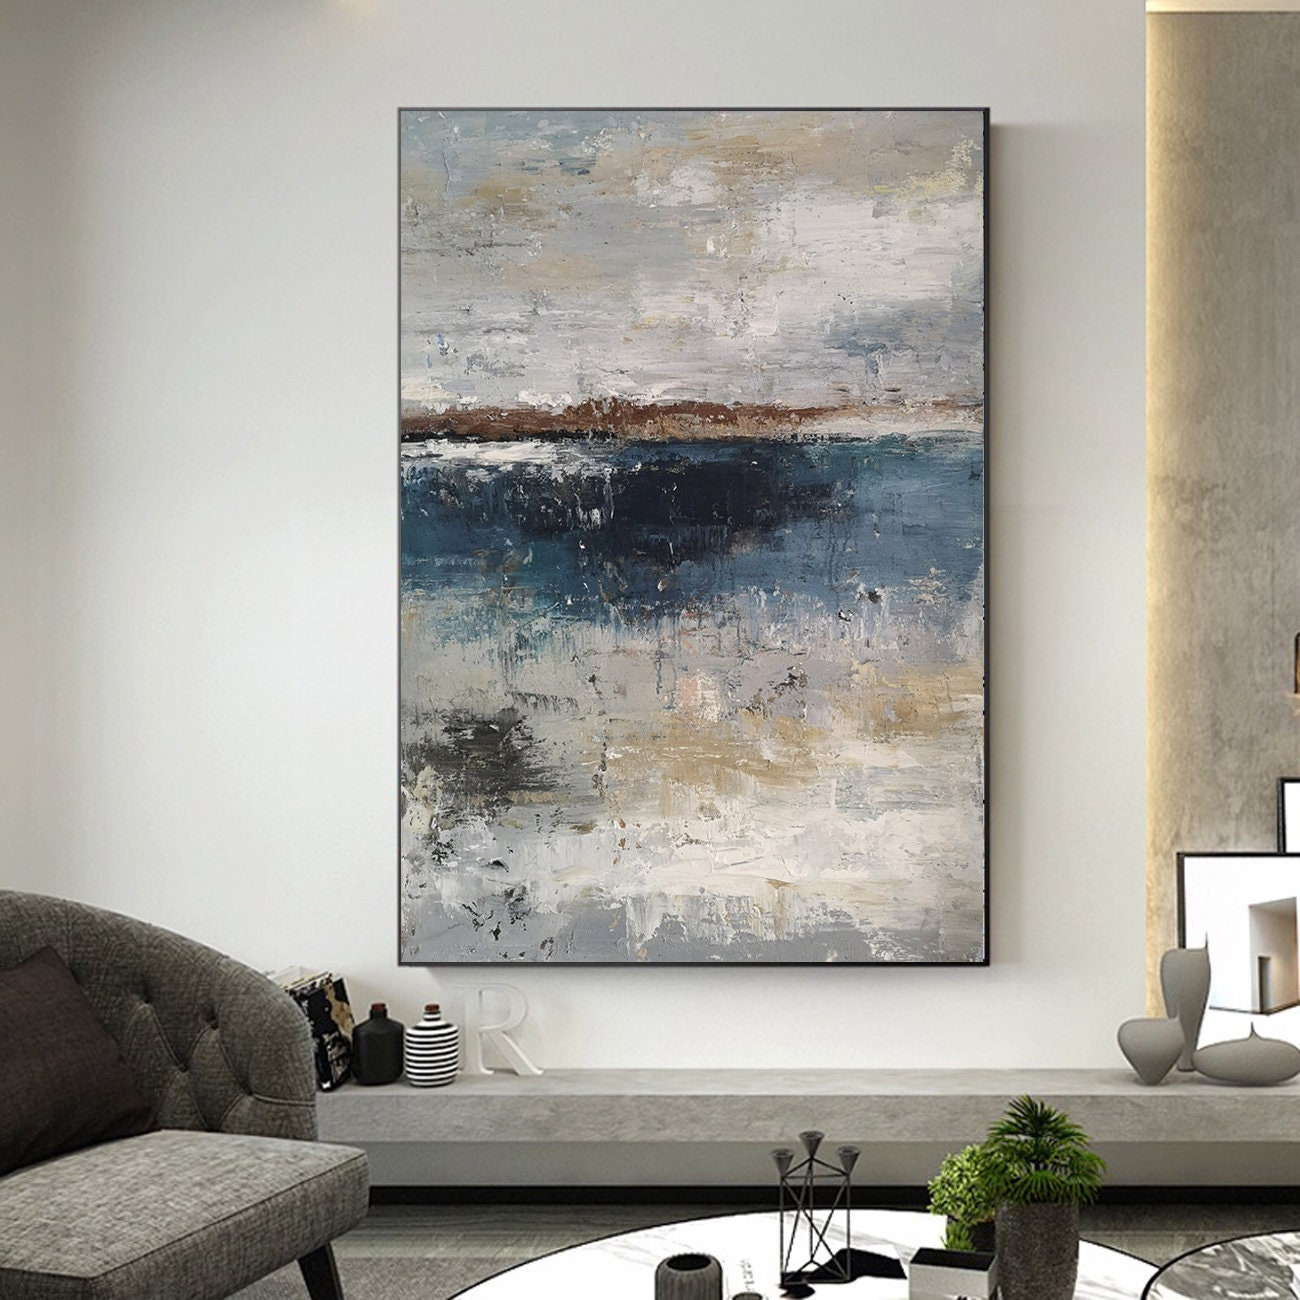 Large black and white abstract art painting for sale - 'Polaris